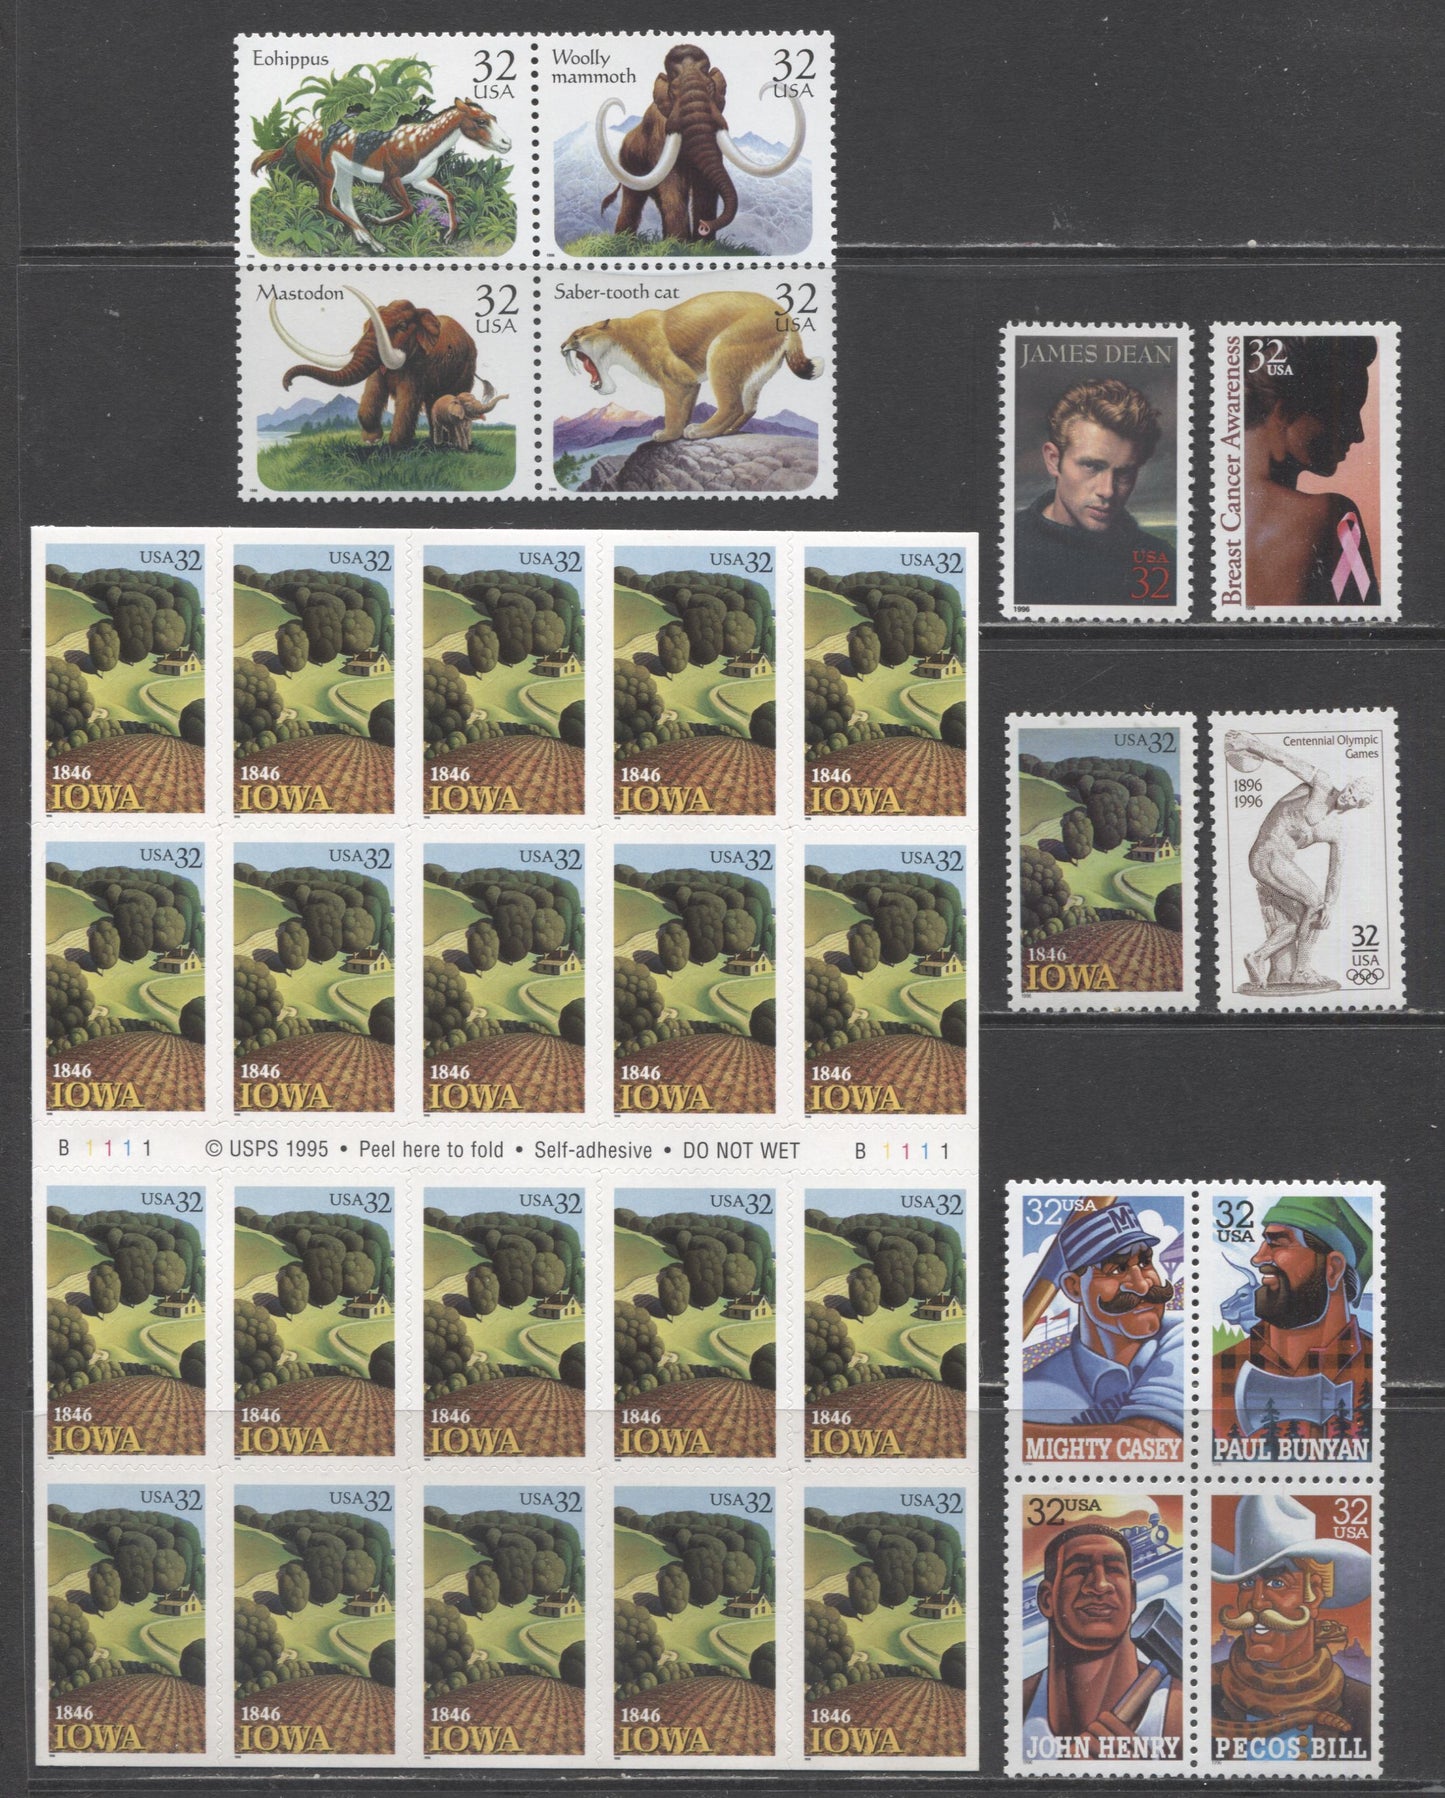 Lot 67 United States SC#3080a/3089a 1996 Prehistoric Animals, Breast Cancer Awareness, Legends Of Hollywood, Folk Heroes, Centennial Olympics & Iowa Issues, 7 VFNH Singles, Block Of 4 & 20, Click on Listing to See ALL Pictures, 2017 Scott Cat. $21.05